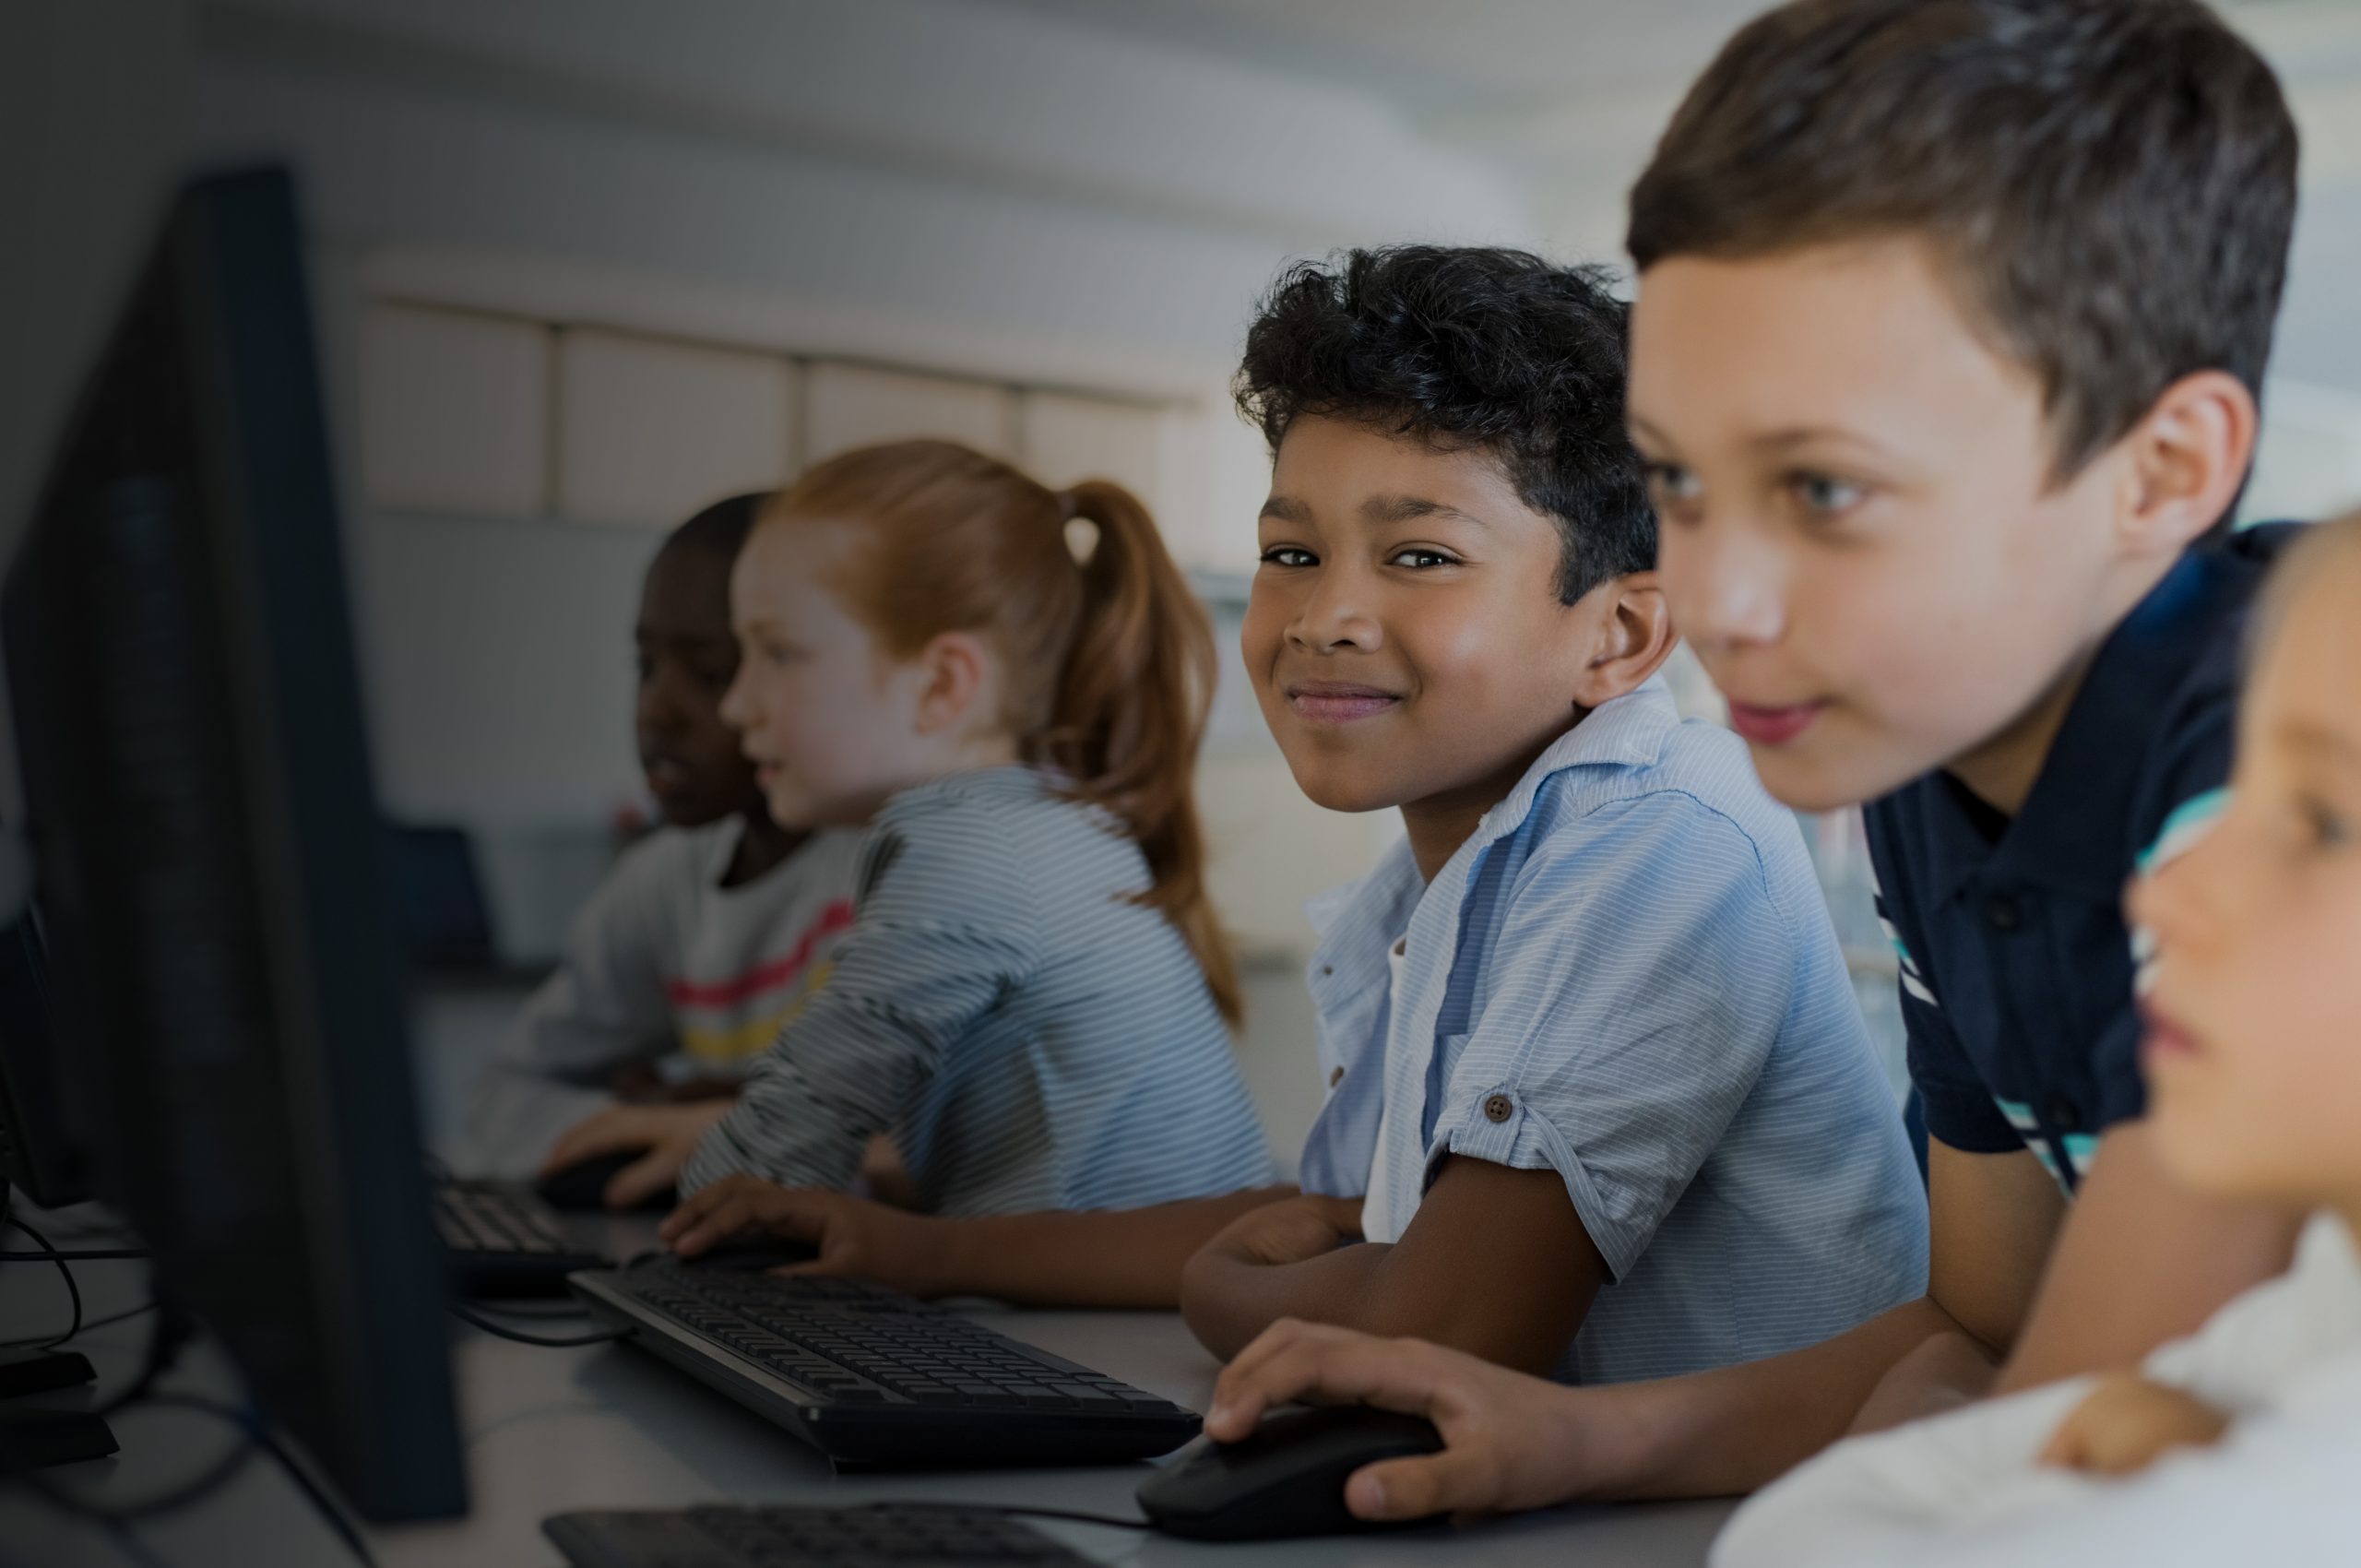 children at school, sitting in a row looking at computers, one is smiling at the camera